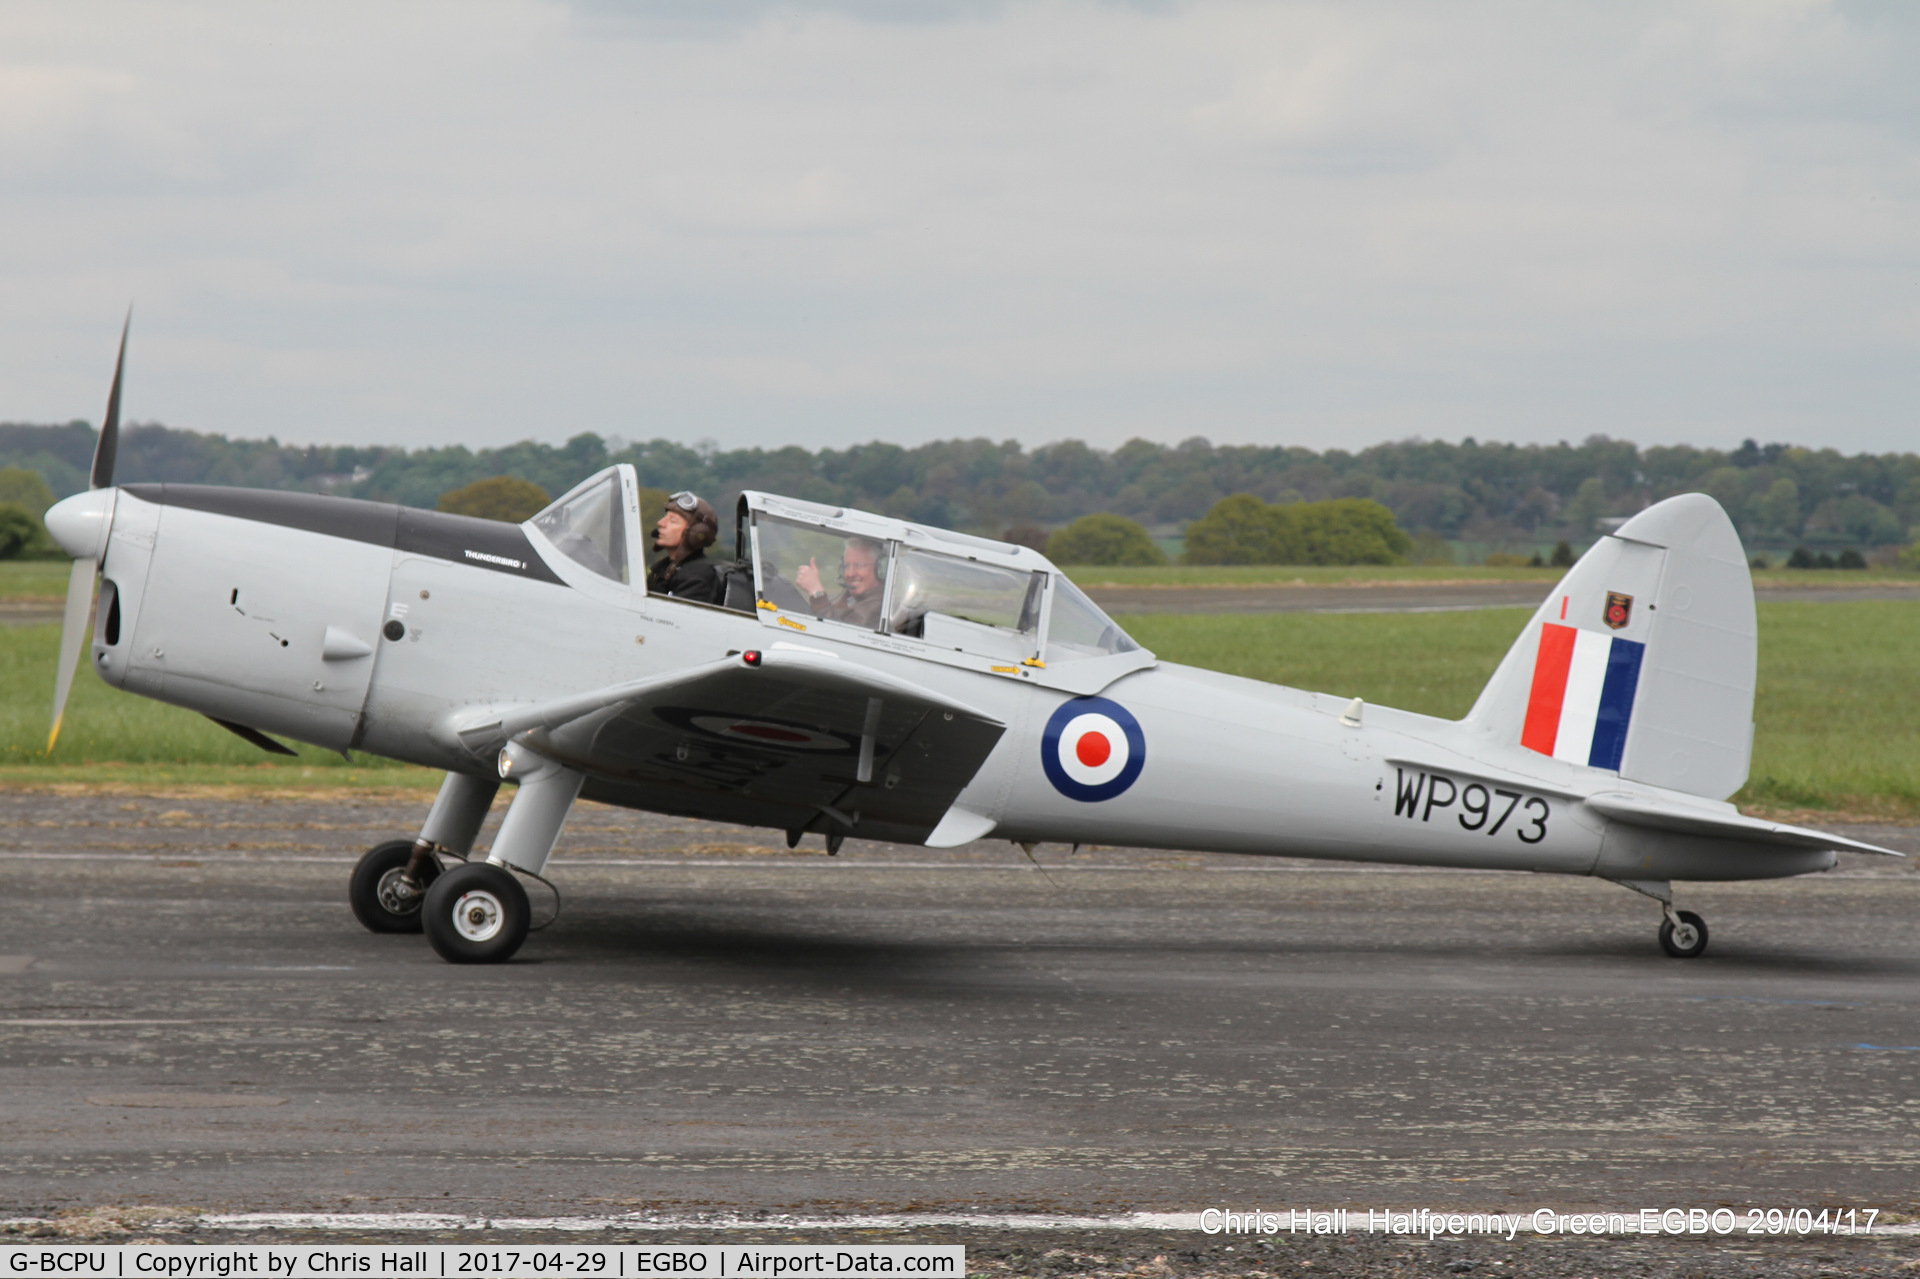 G-BCPU, 1953 De Havilland DHC-1 Chipmunk T.10 C/N C1/0839, at the Radial & Trainer fly-in